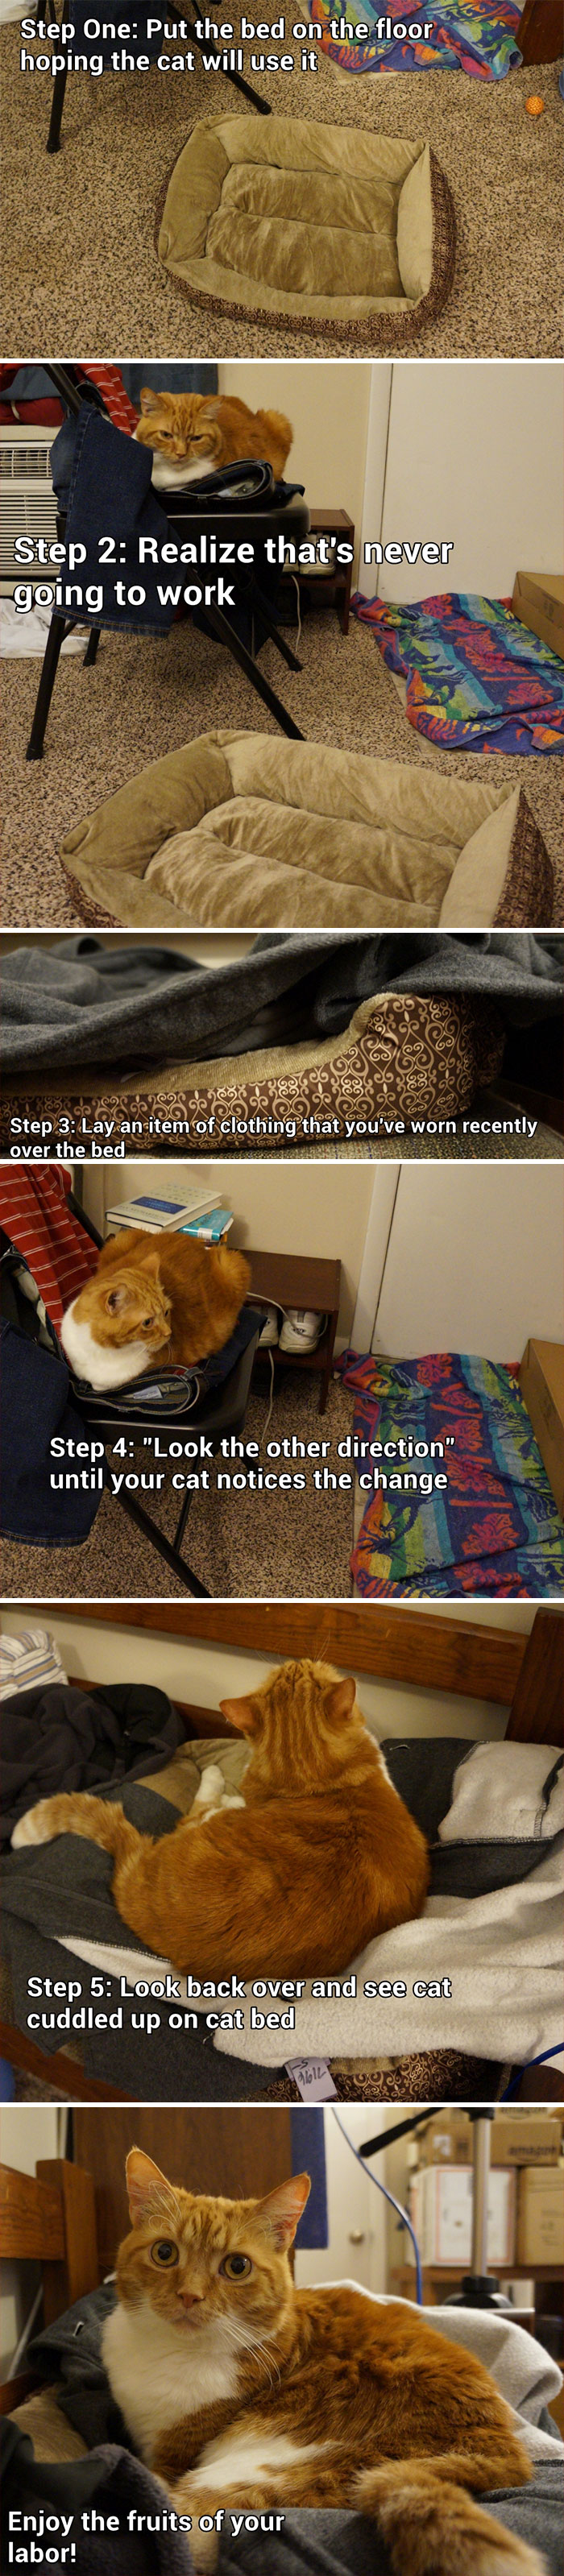 How To Get Your Cat To Use A Pet Bed